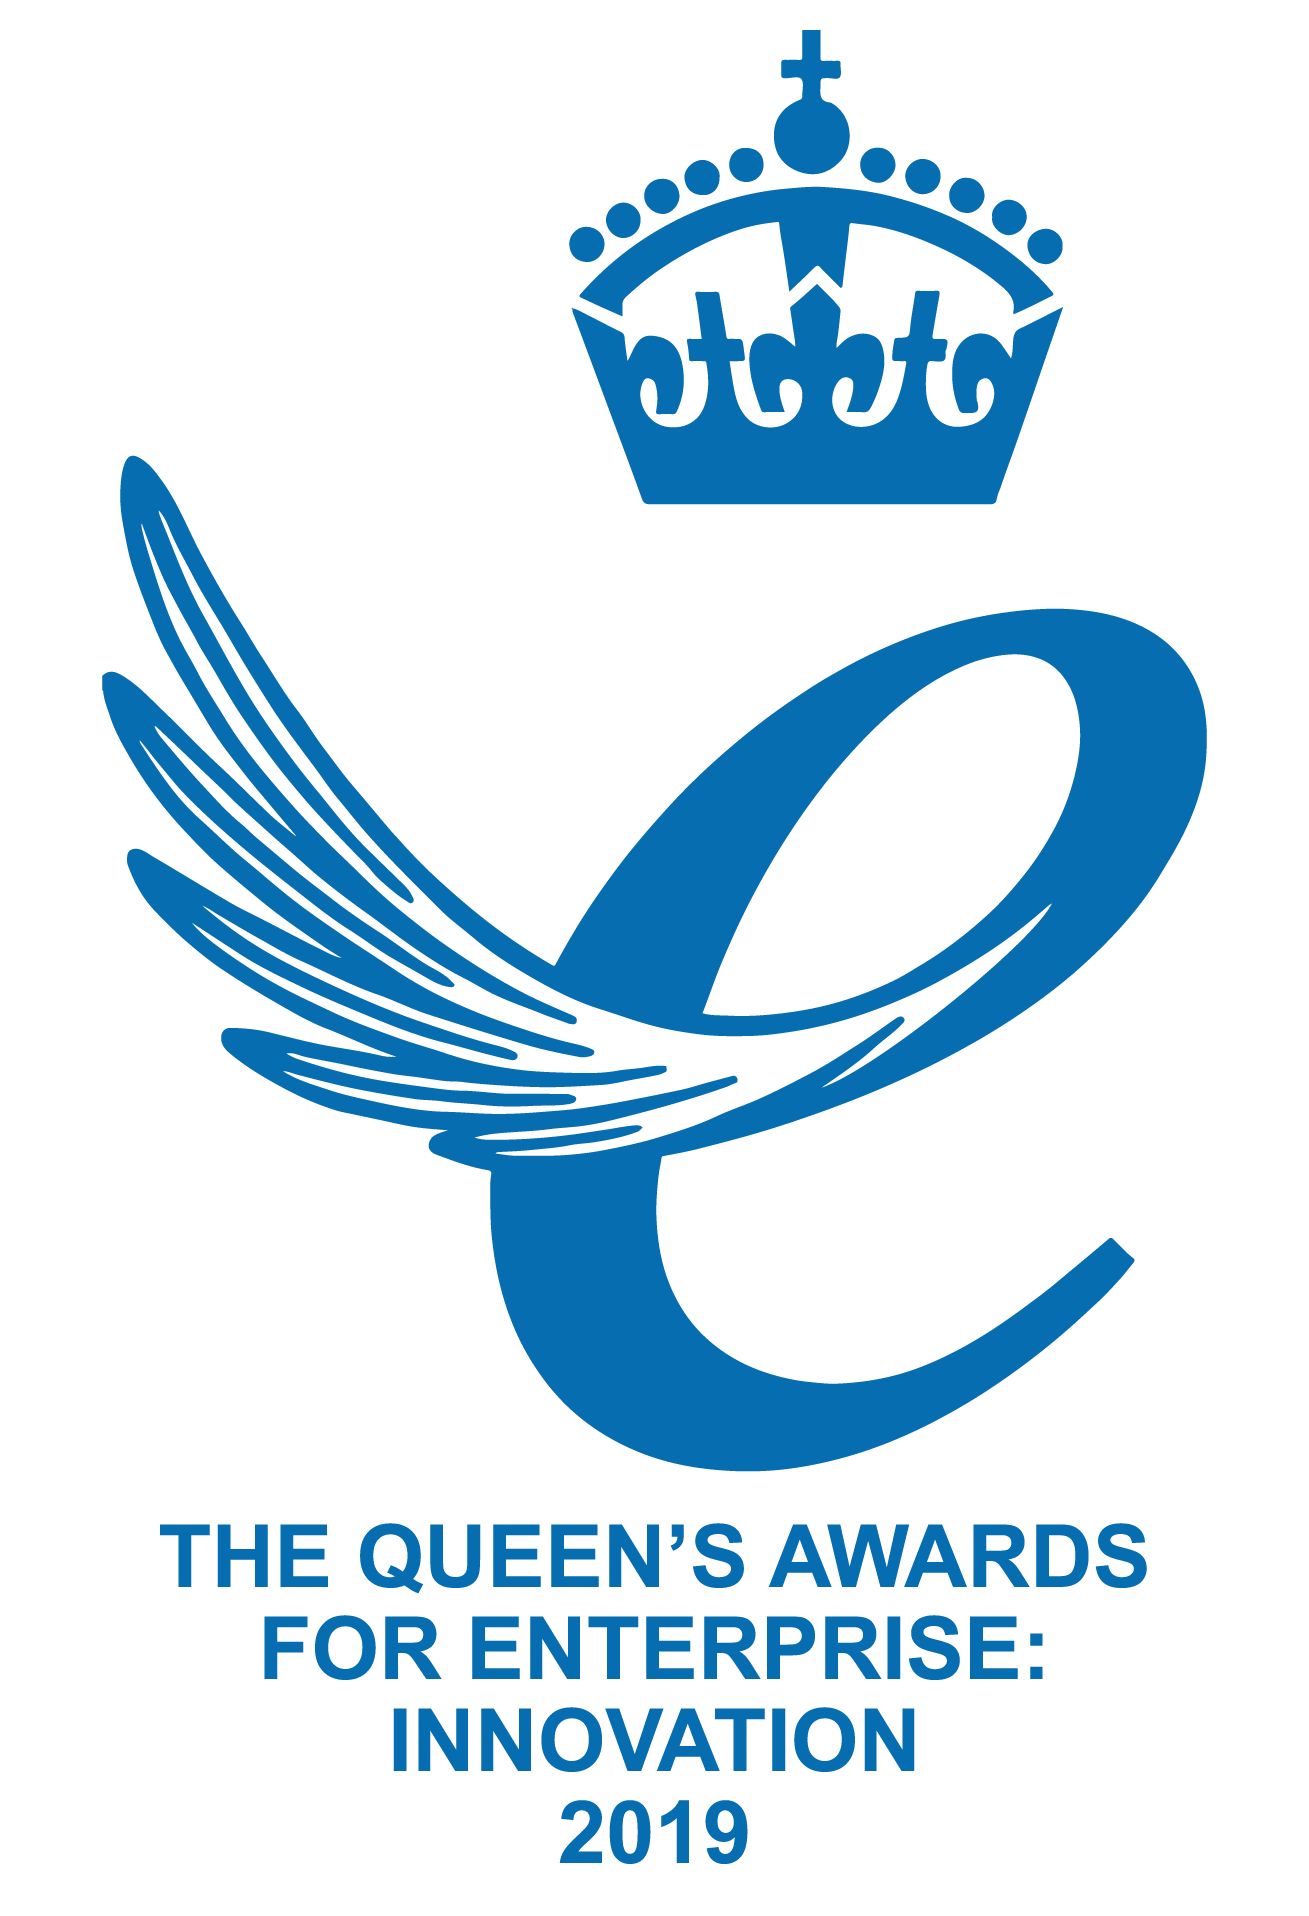 The Queen's Awards for Innovation